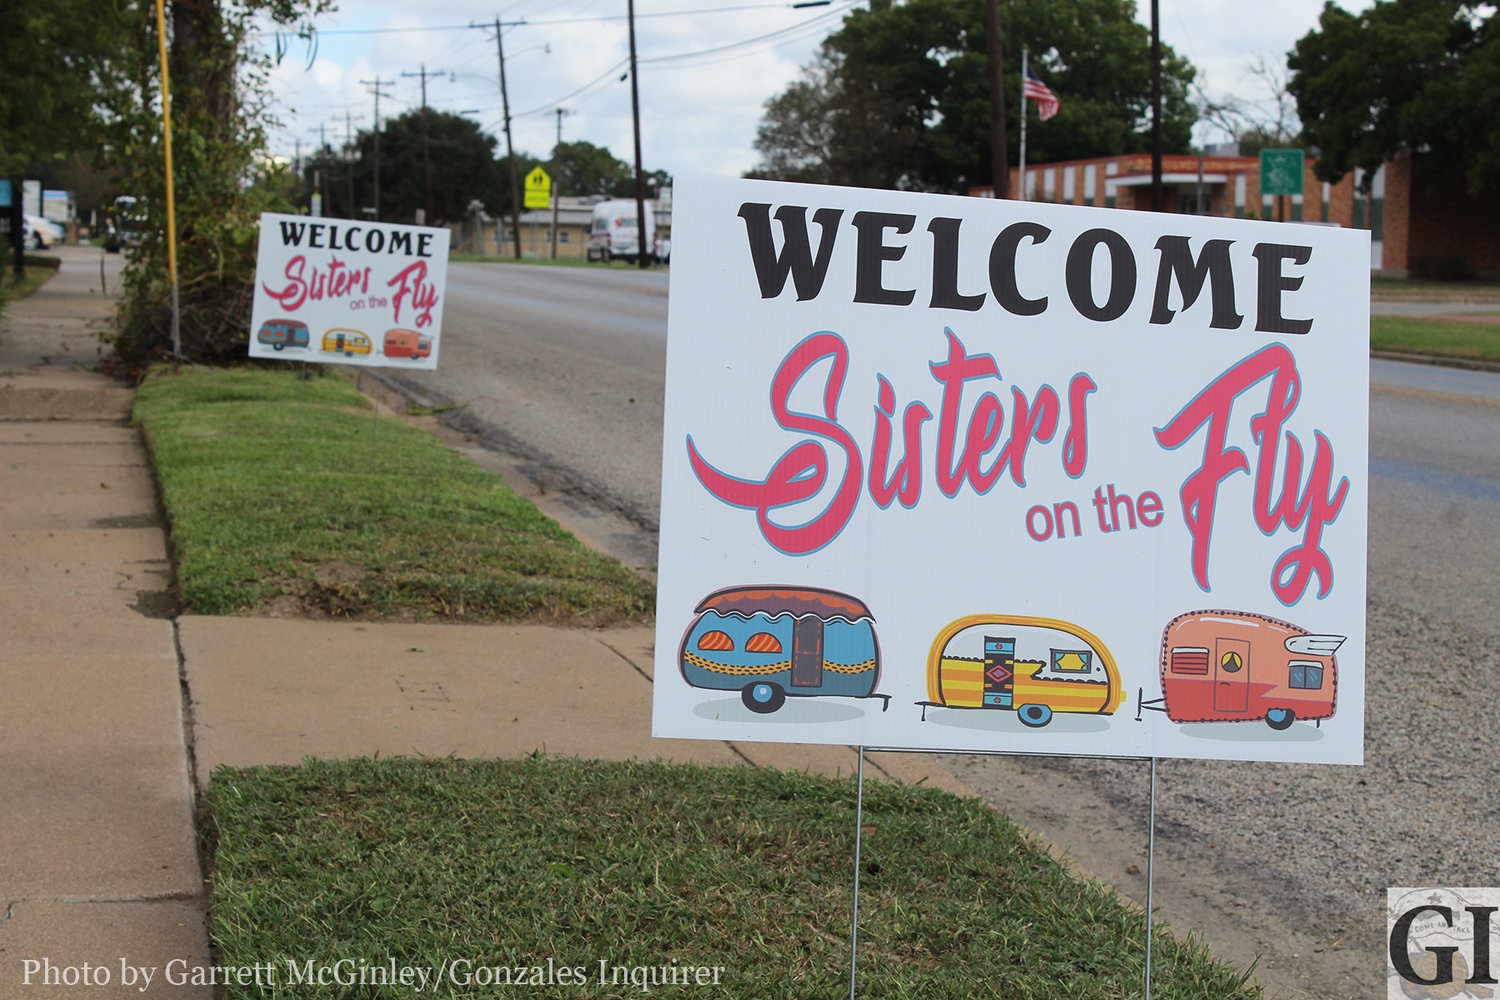 This year’s Come and Take It will see an influx of sisters. These signs placed around town are a joint project by some of Gonzales’ tourism organizations to welcome the Sisters on the Fly to Gonzales.